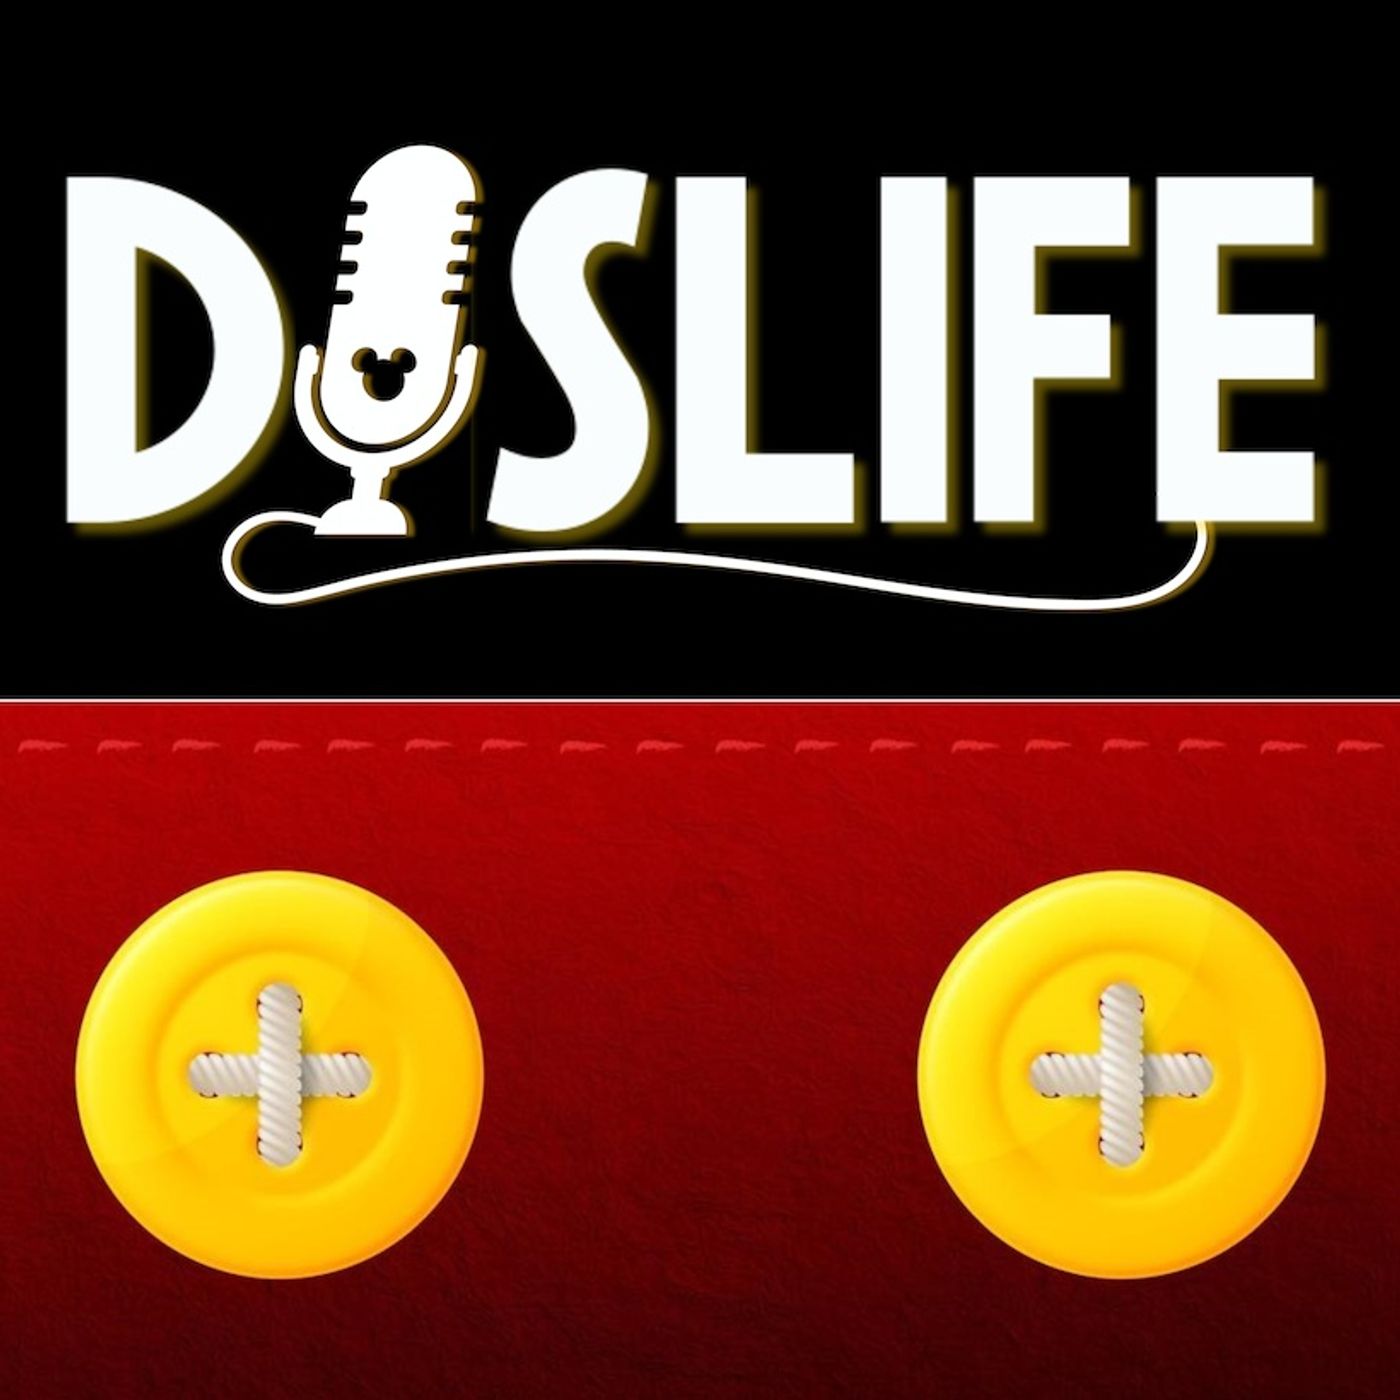 Dislife Podcast | Changes to DAS Pass